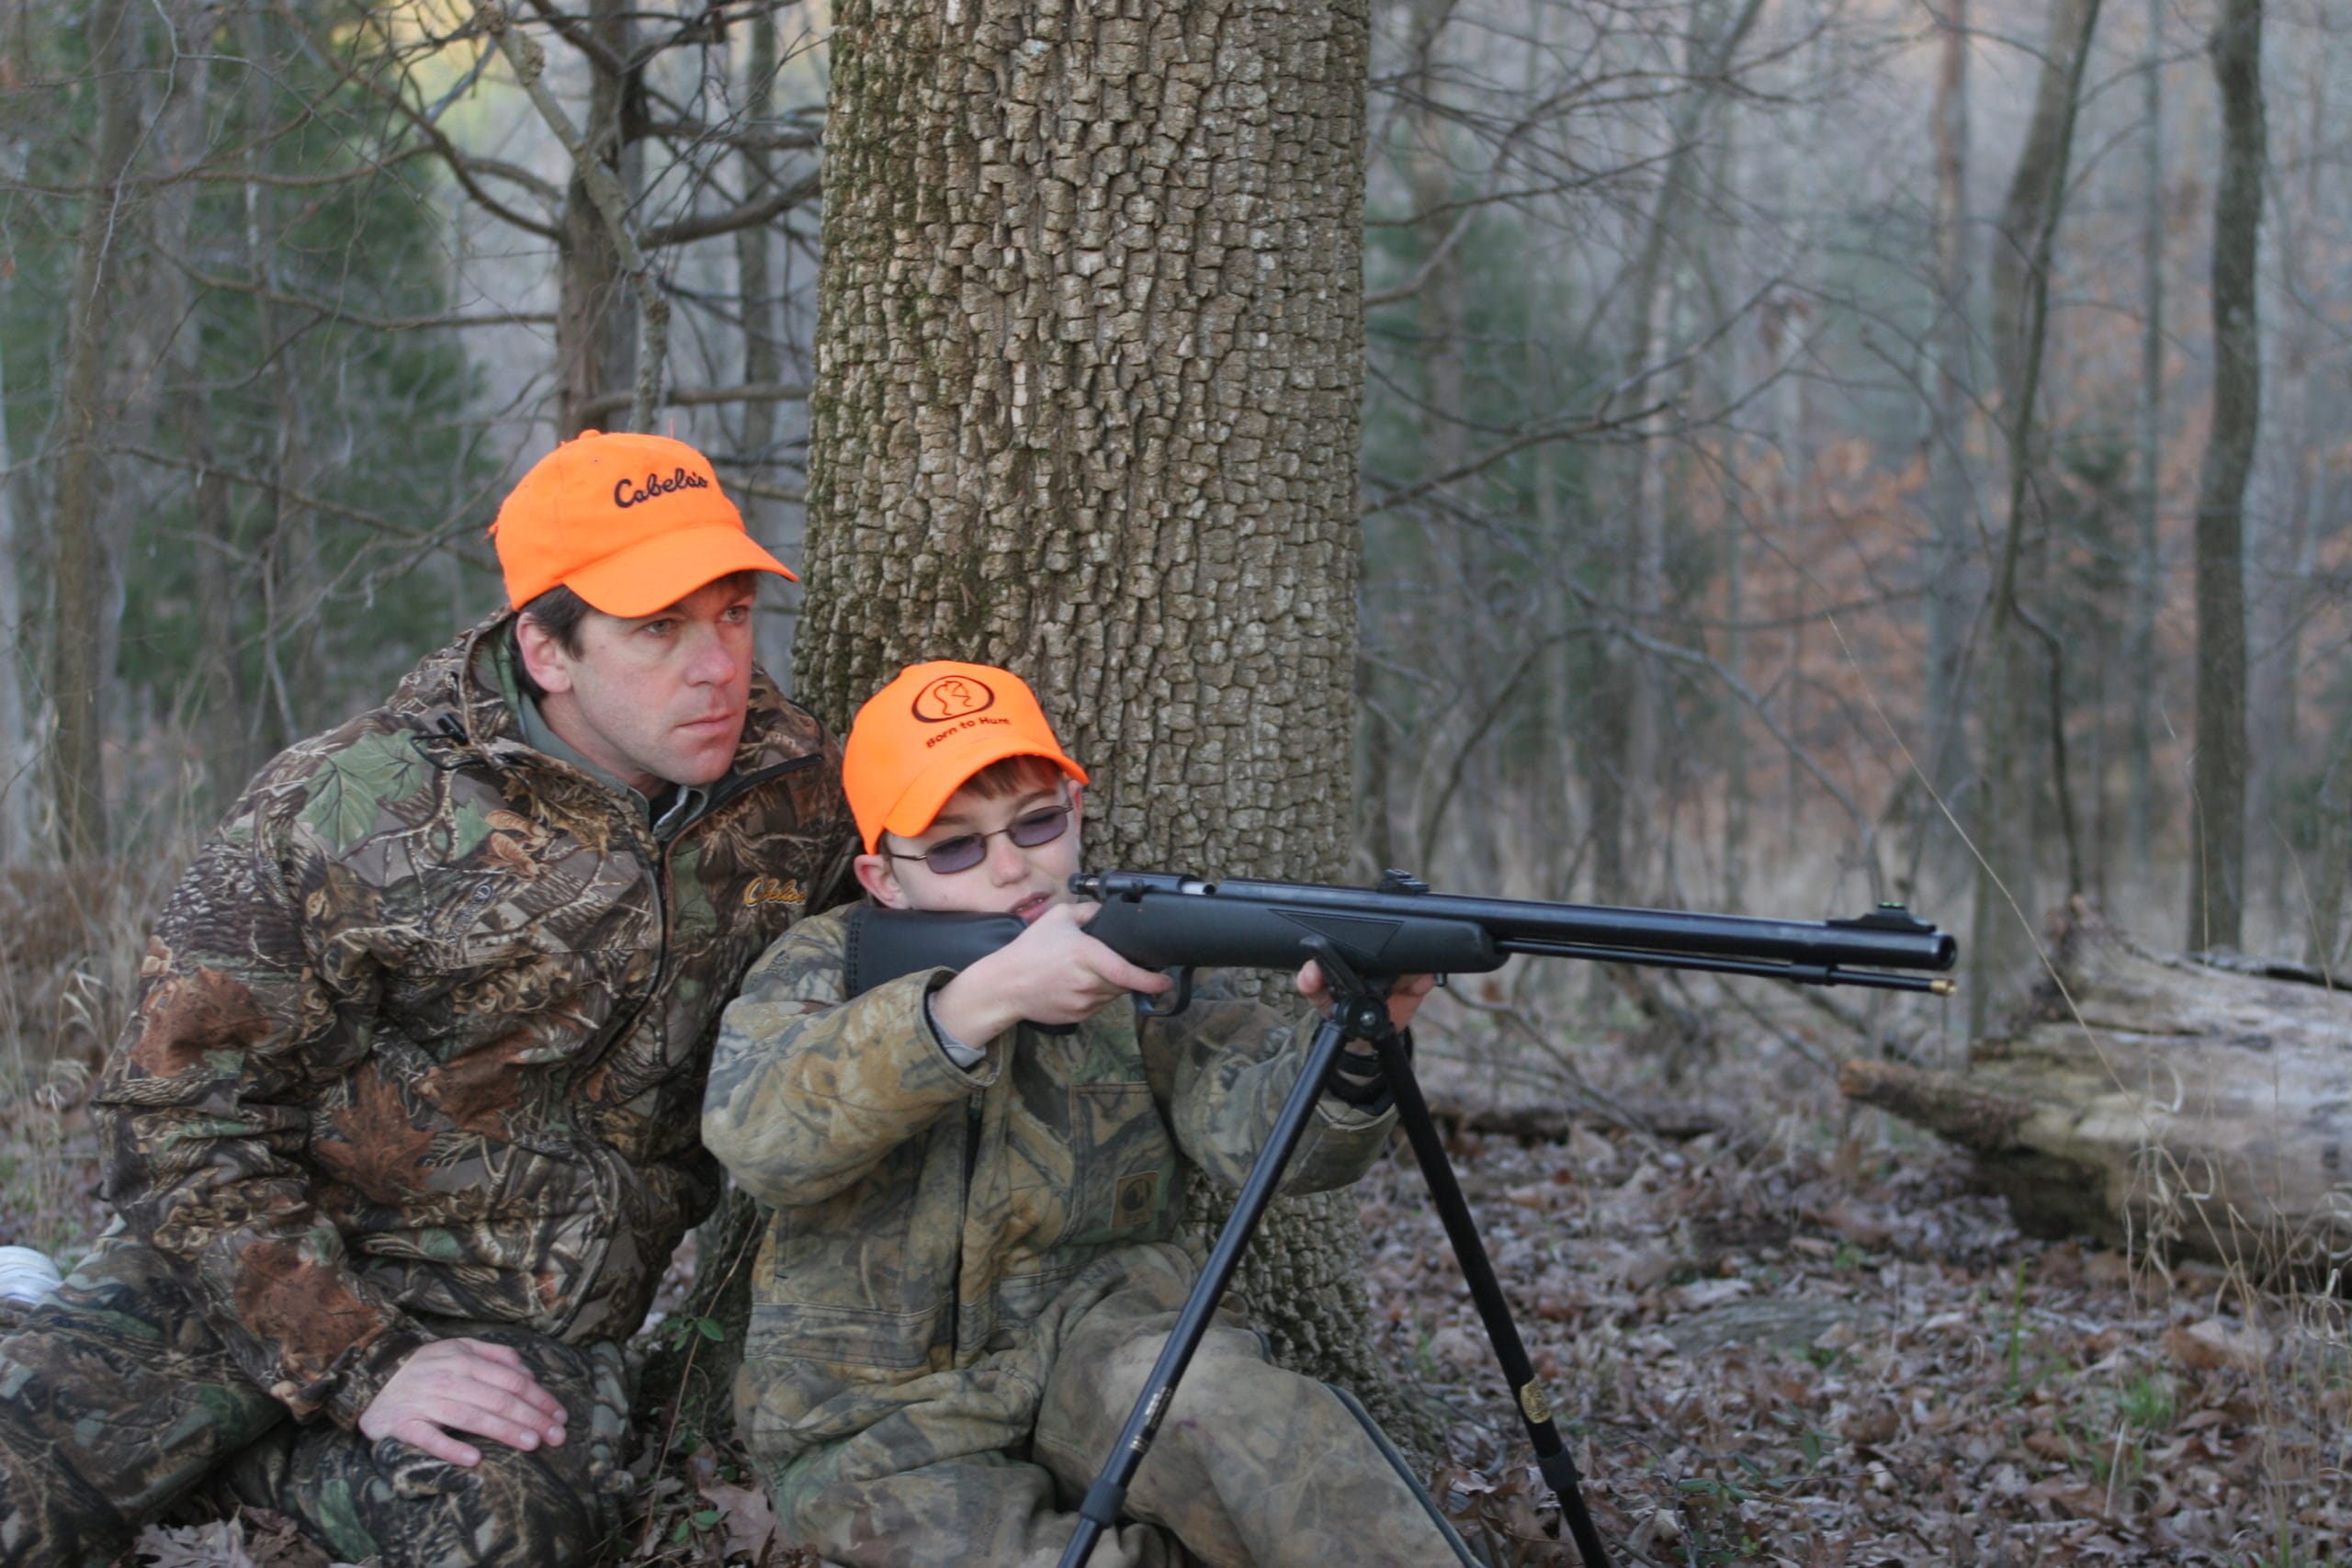 The addition of Sunday hunting will give parents the freedom to take their kids more often. As hunter numbers decline, it’s vital to instill the hunting ethic in the next generation.